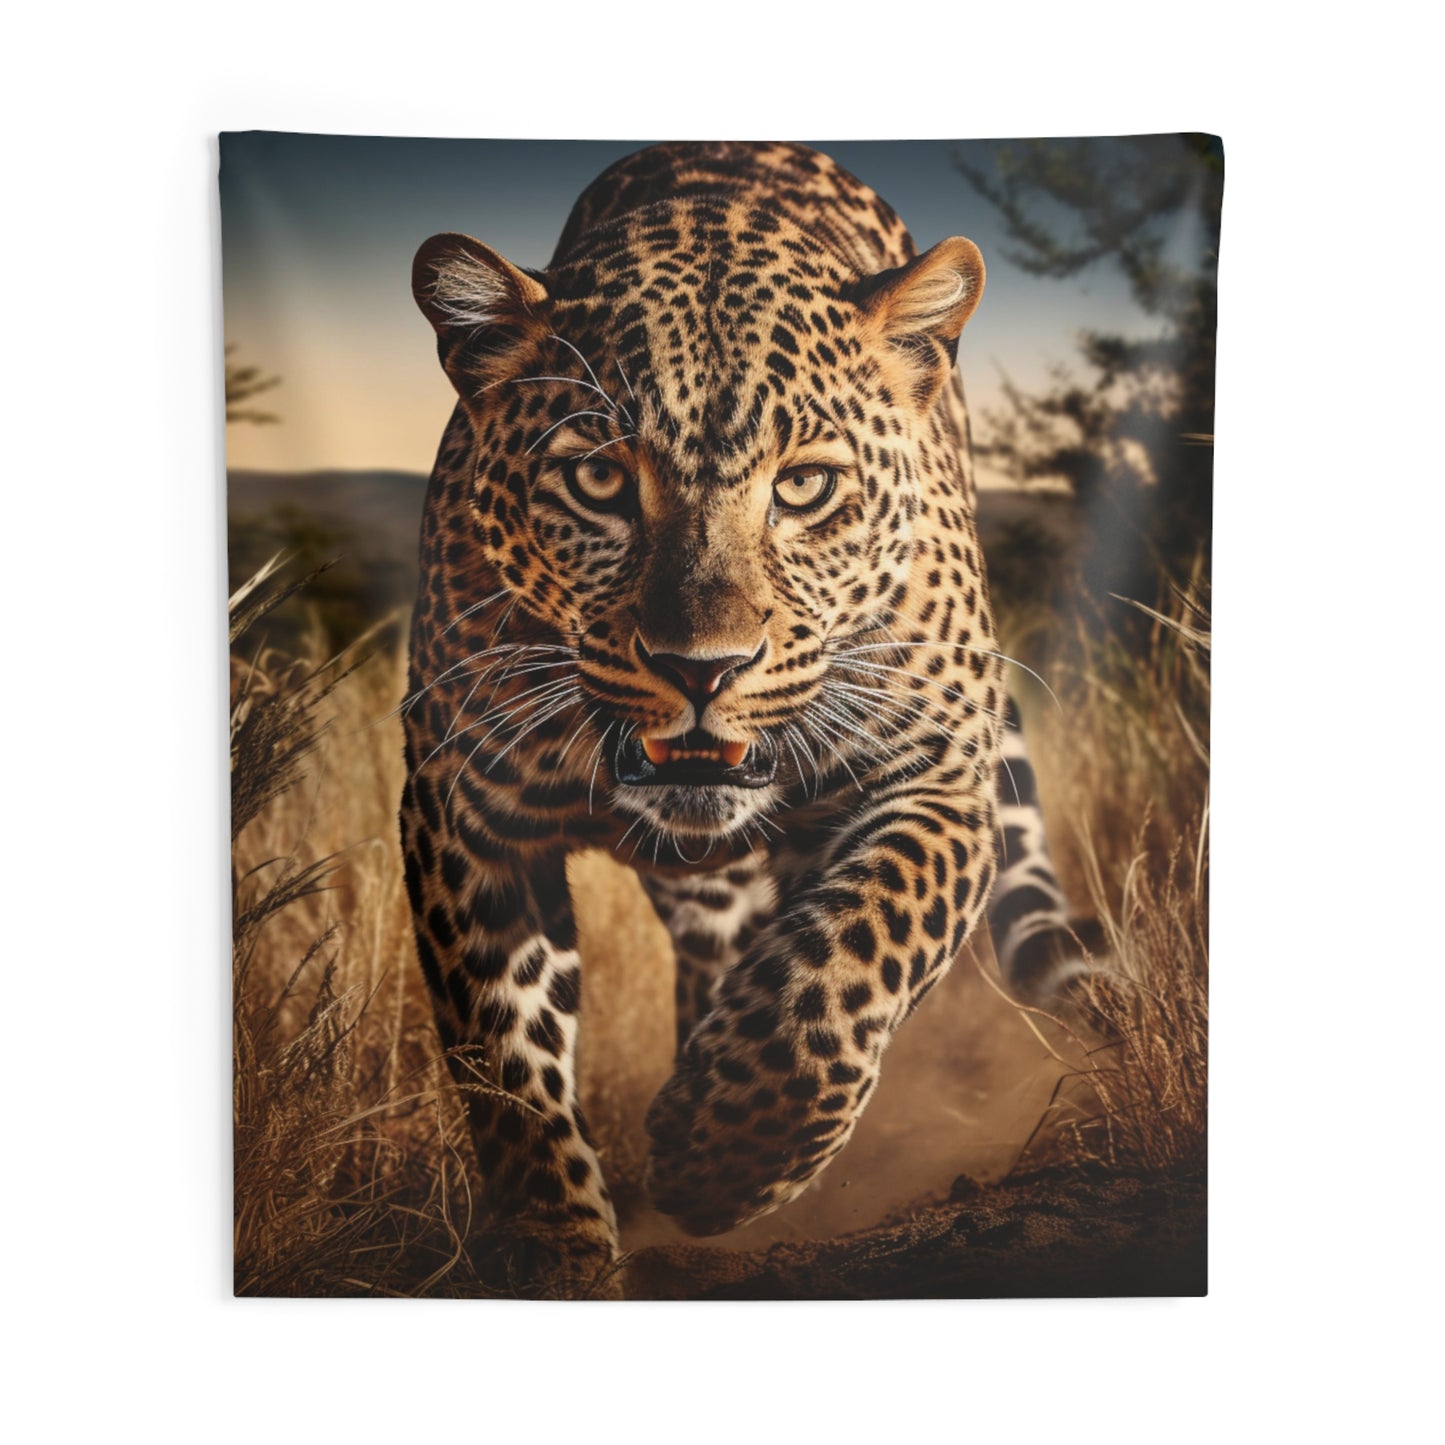 Leopard Tapestry, Cheetah Animal Wall Art Hanging Cool Unique Vertical Aesthetic Large Small Decor Bedroom College Dorm Room Starcove Fashion